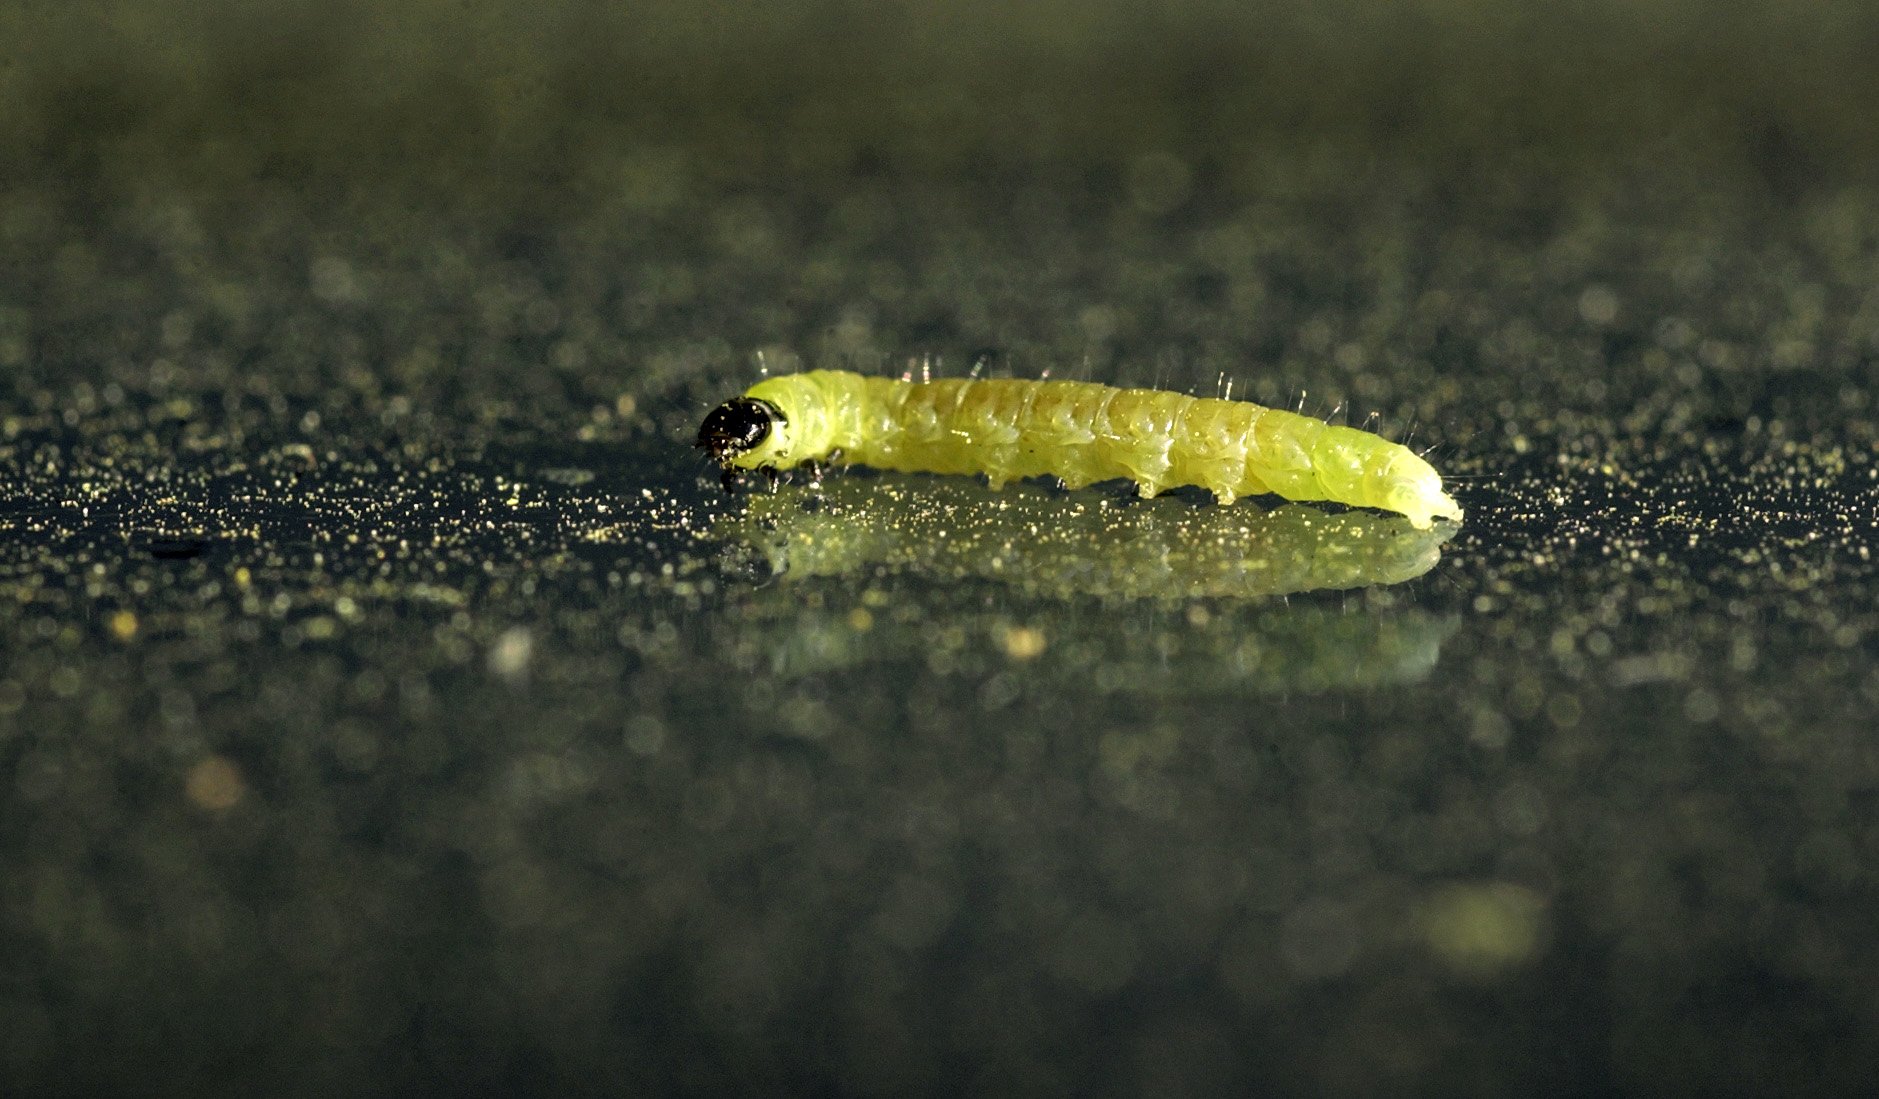 What are those green worms hanging around Florida?